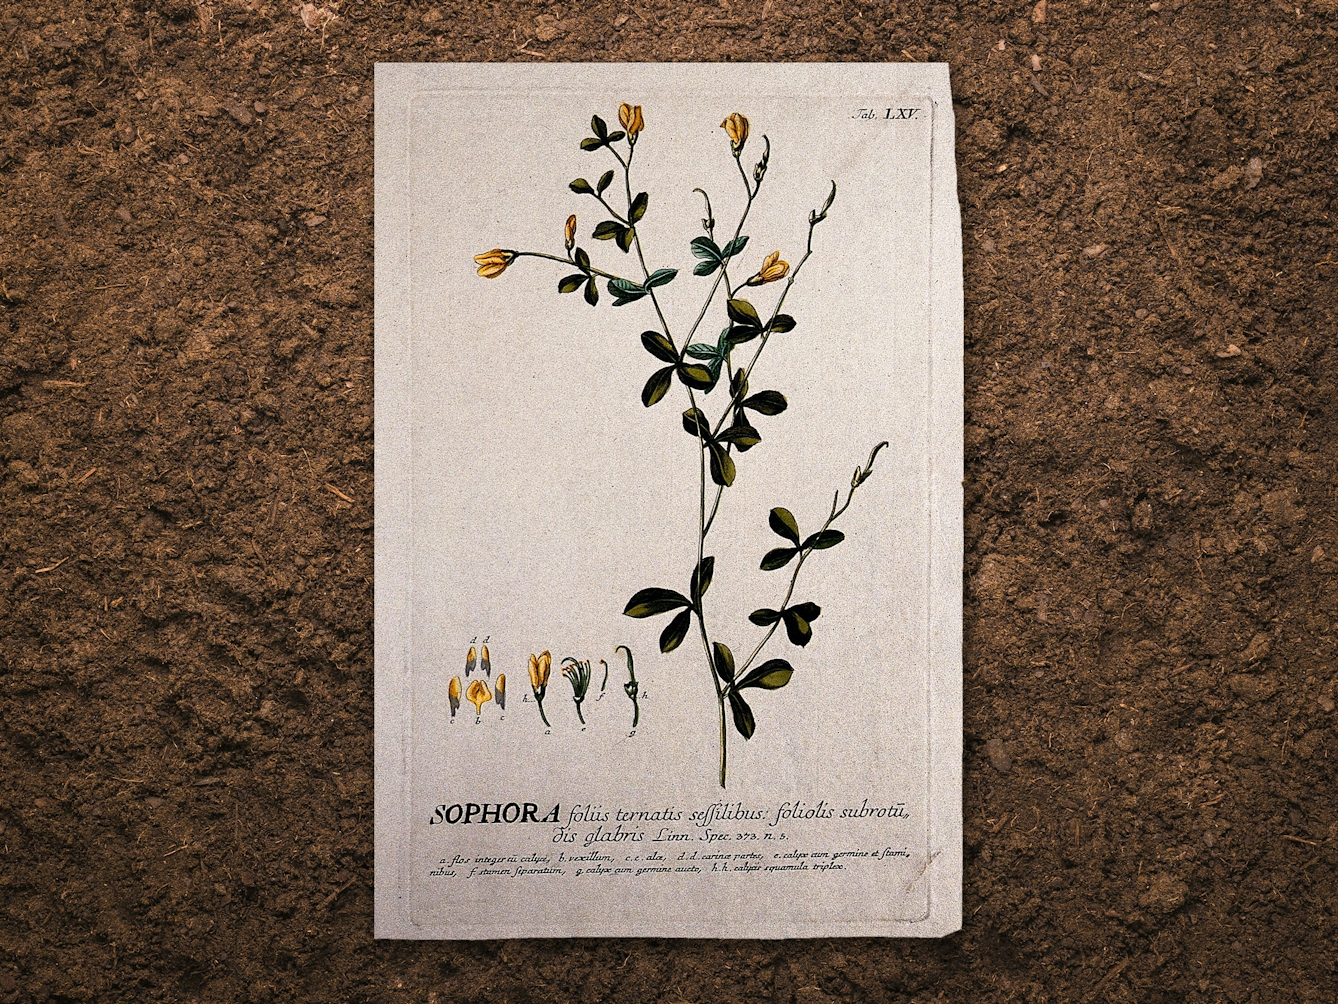 Digital composite image of a botanical drawing resting slightly above a brown earth background, casting a subtle shadow. The drawing shows the flowering and fruiting stems with separate floral segments of a plant related to the pagoda tree. The colours are greens and yellows.